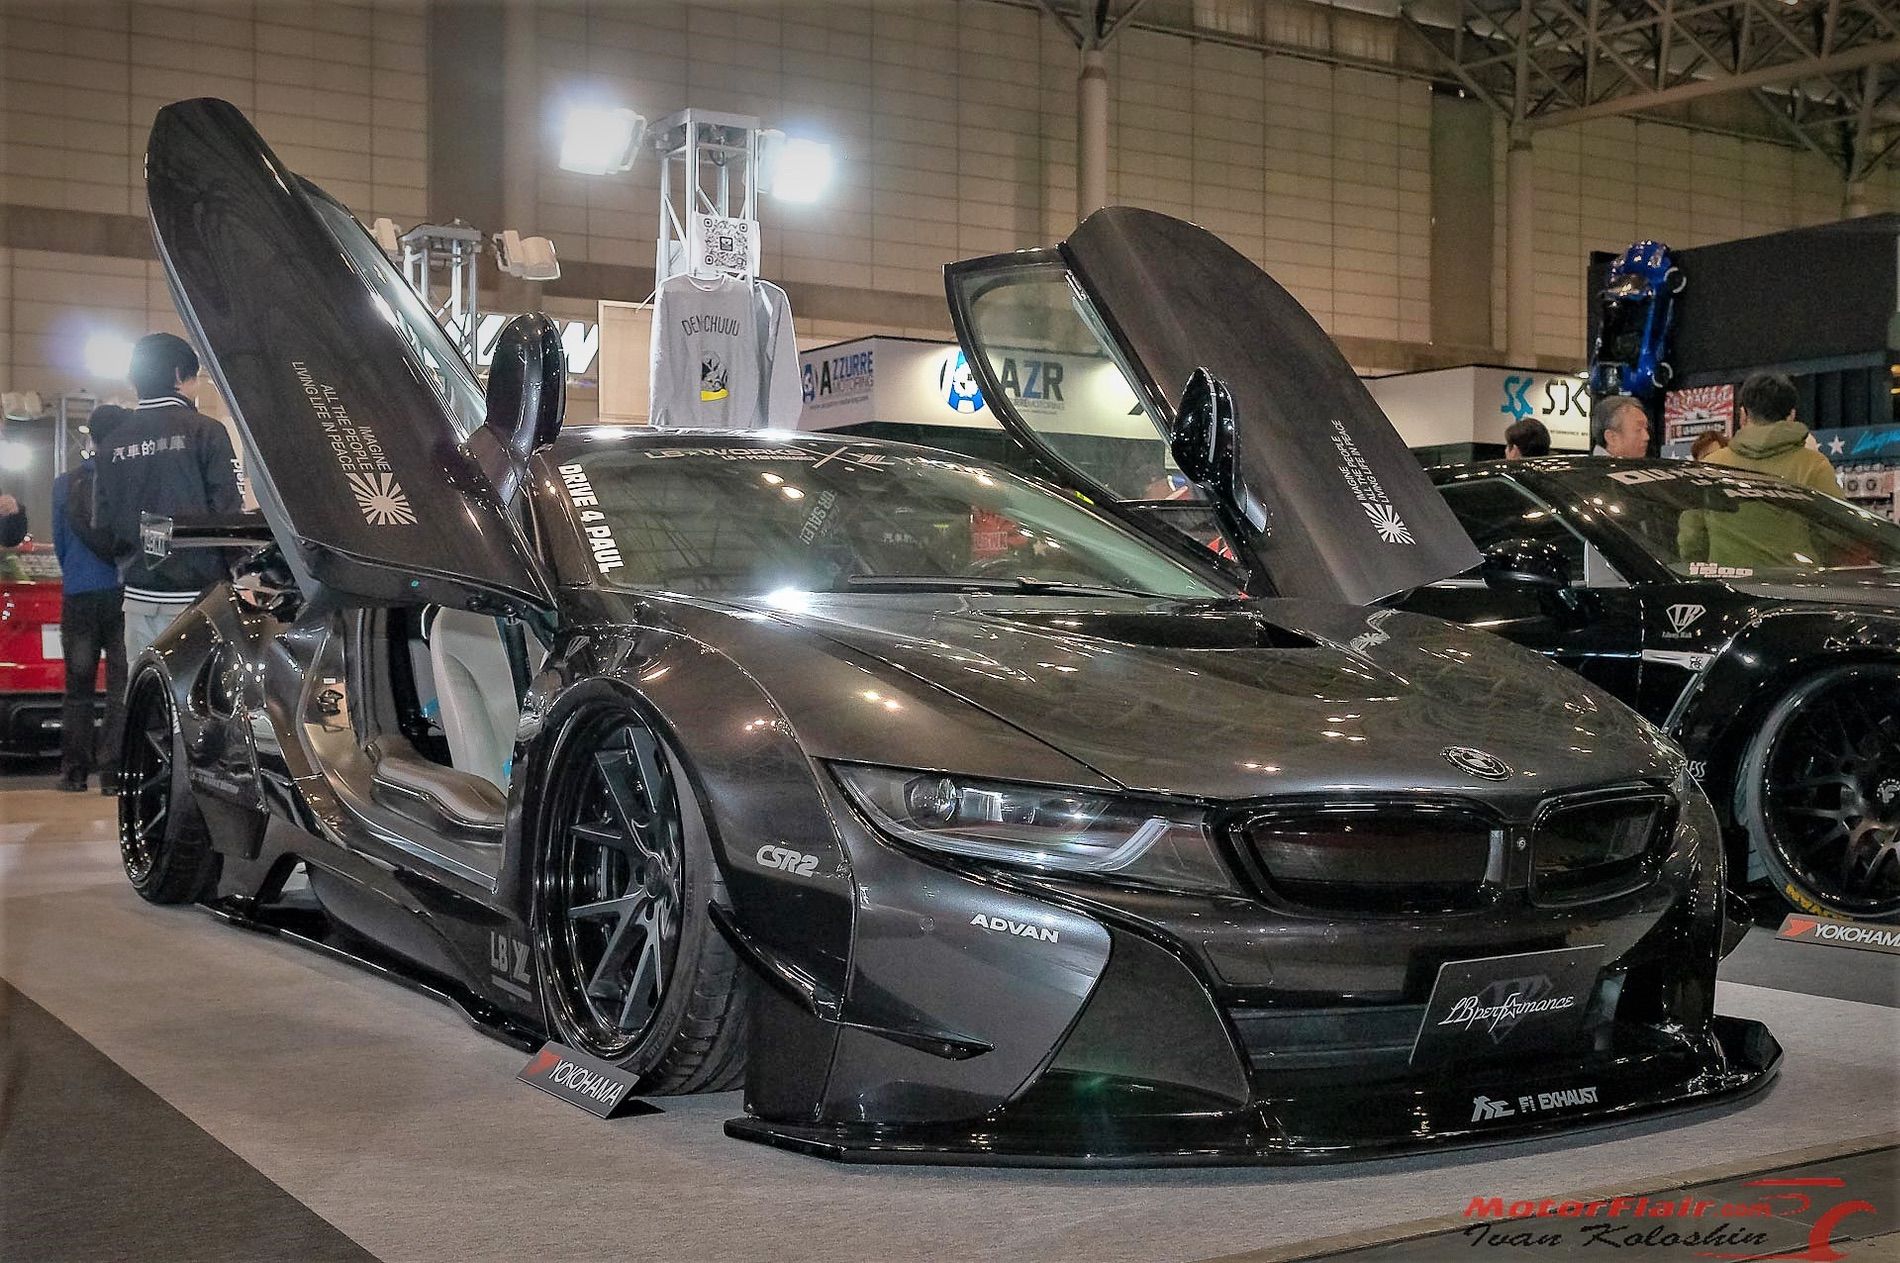 BMW images from 2019 Tokyo Auto Salon